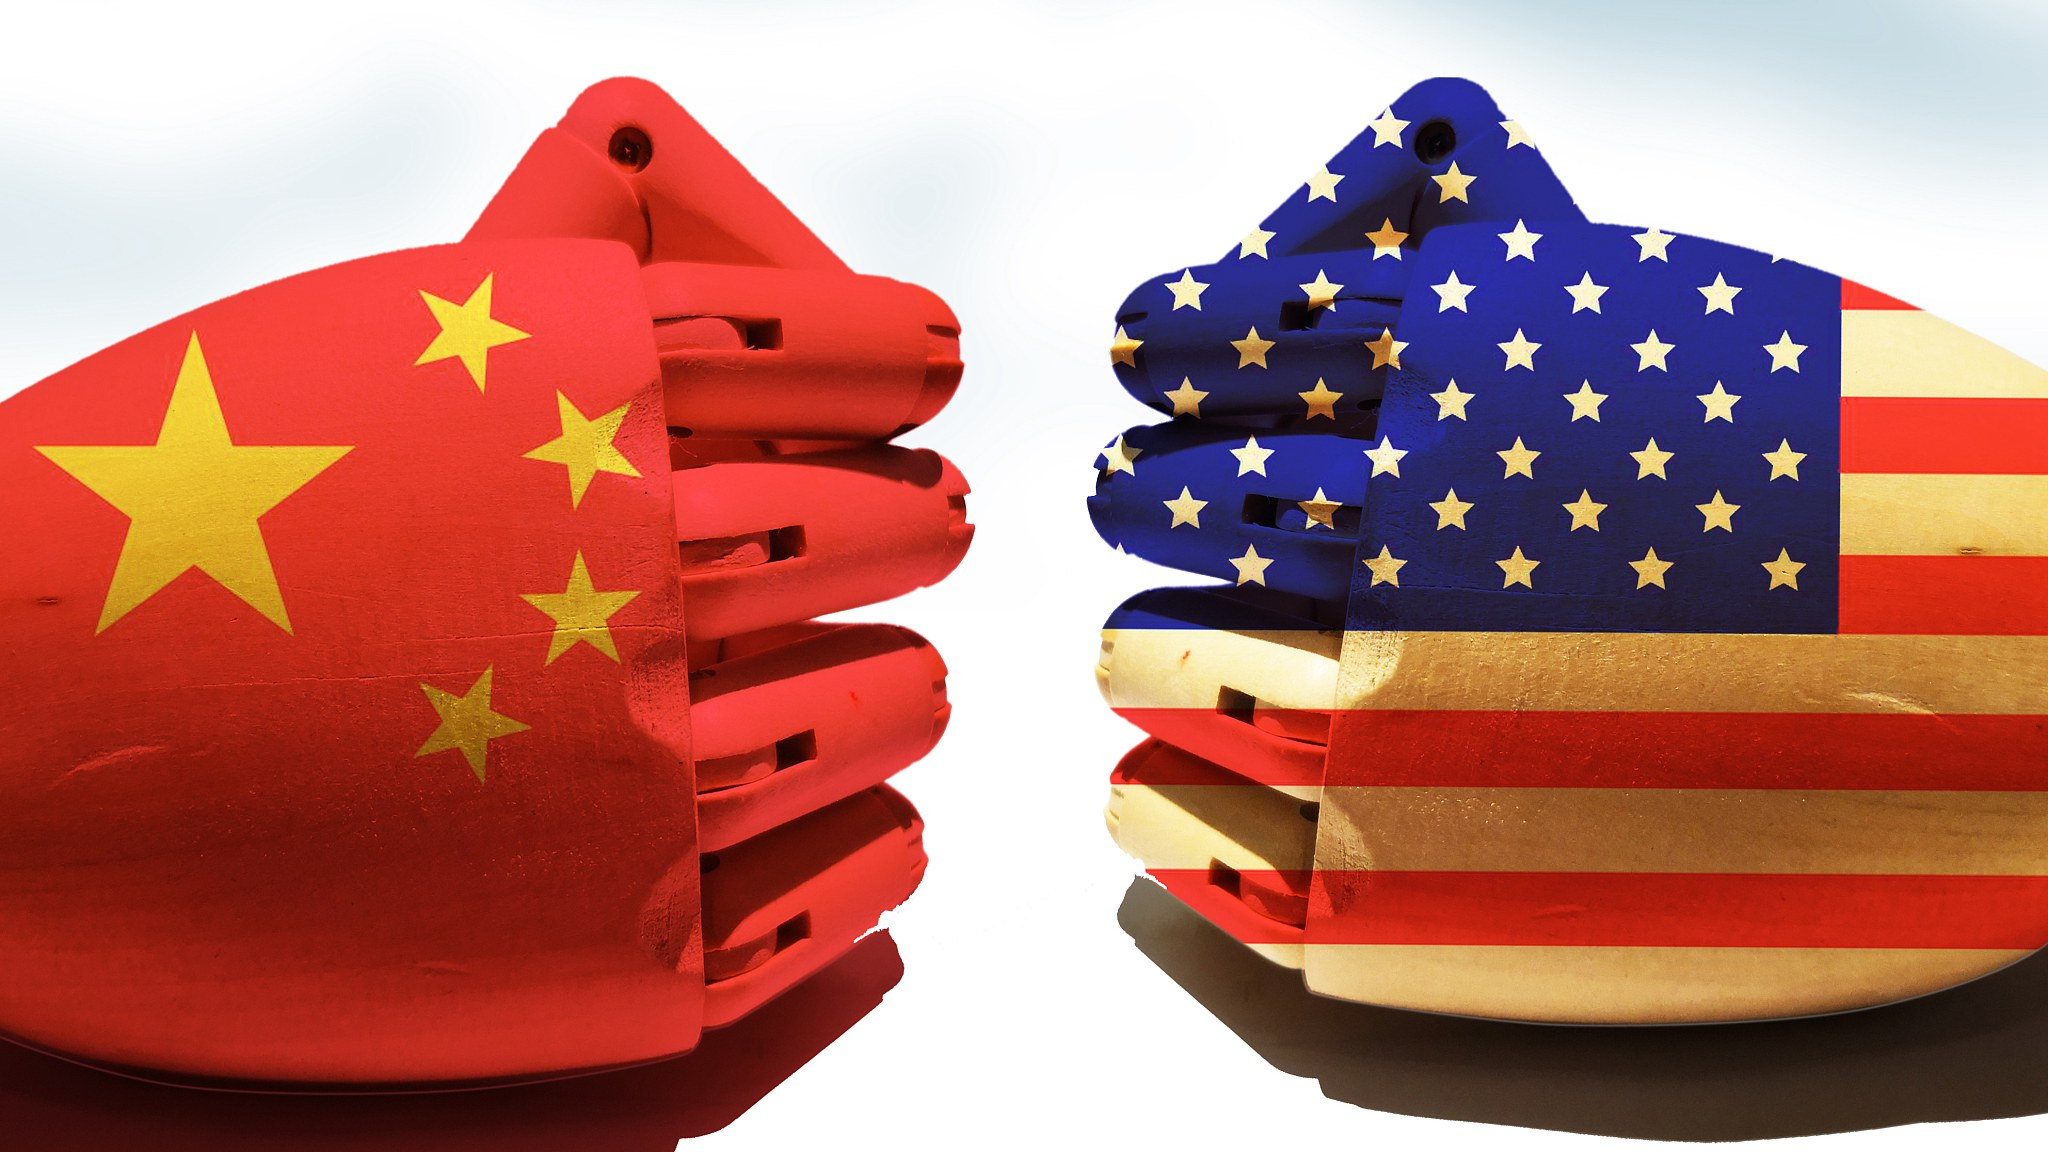 Marketization reform is the ultimate approach to the trade war